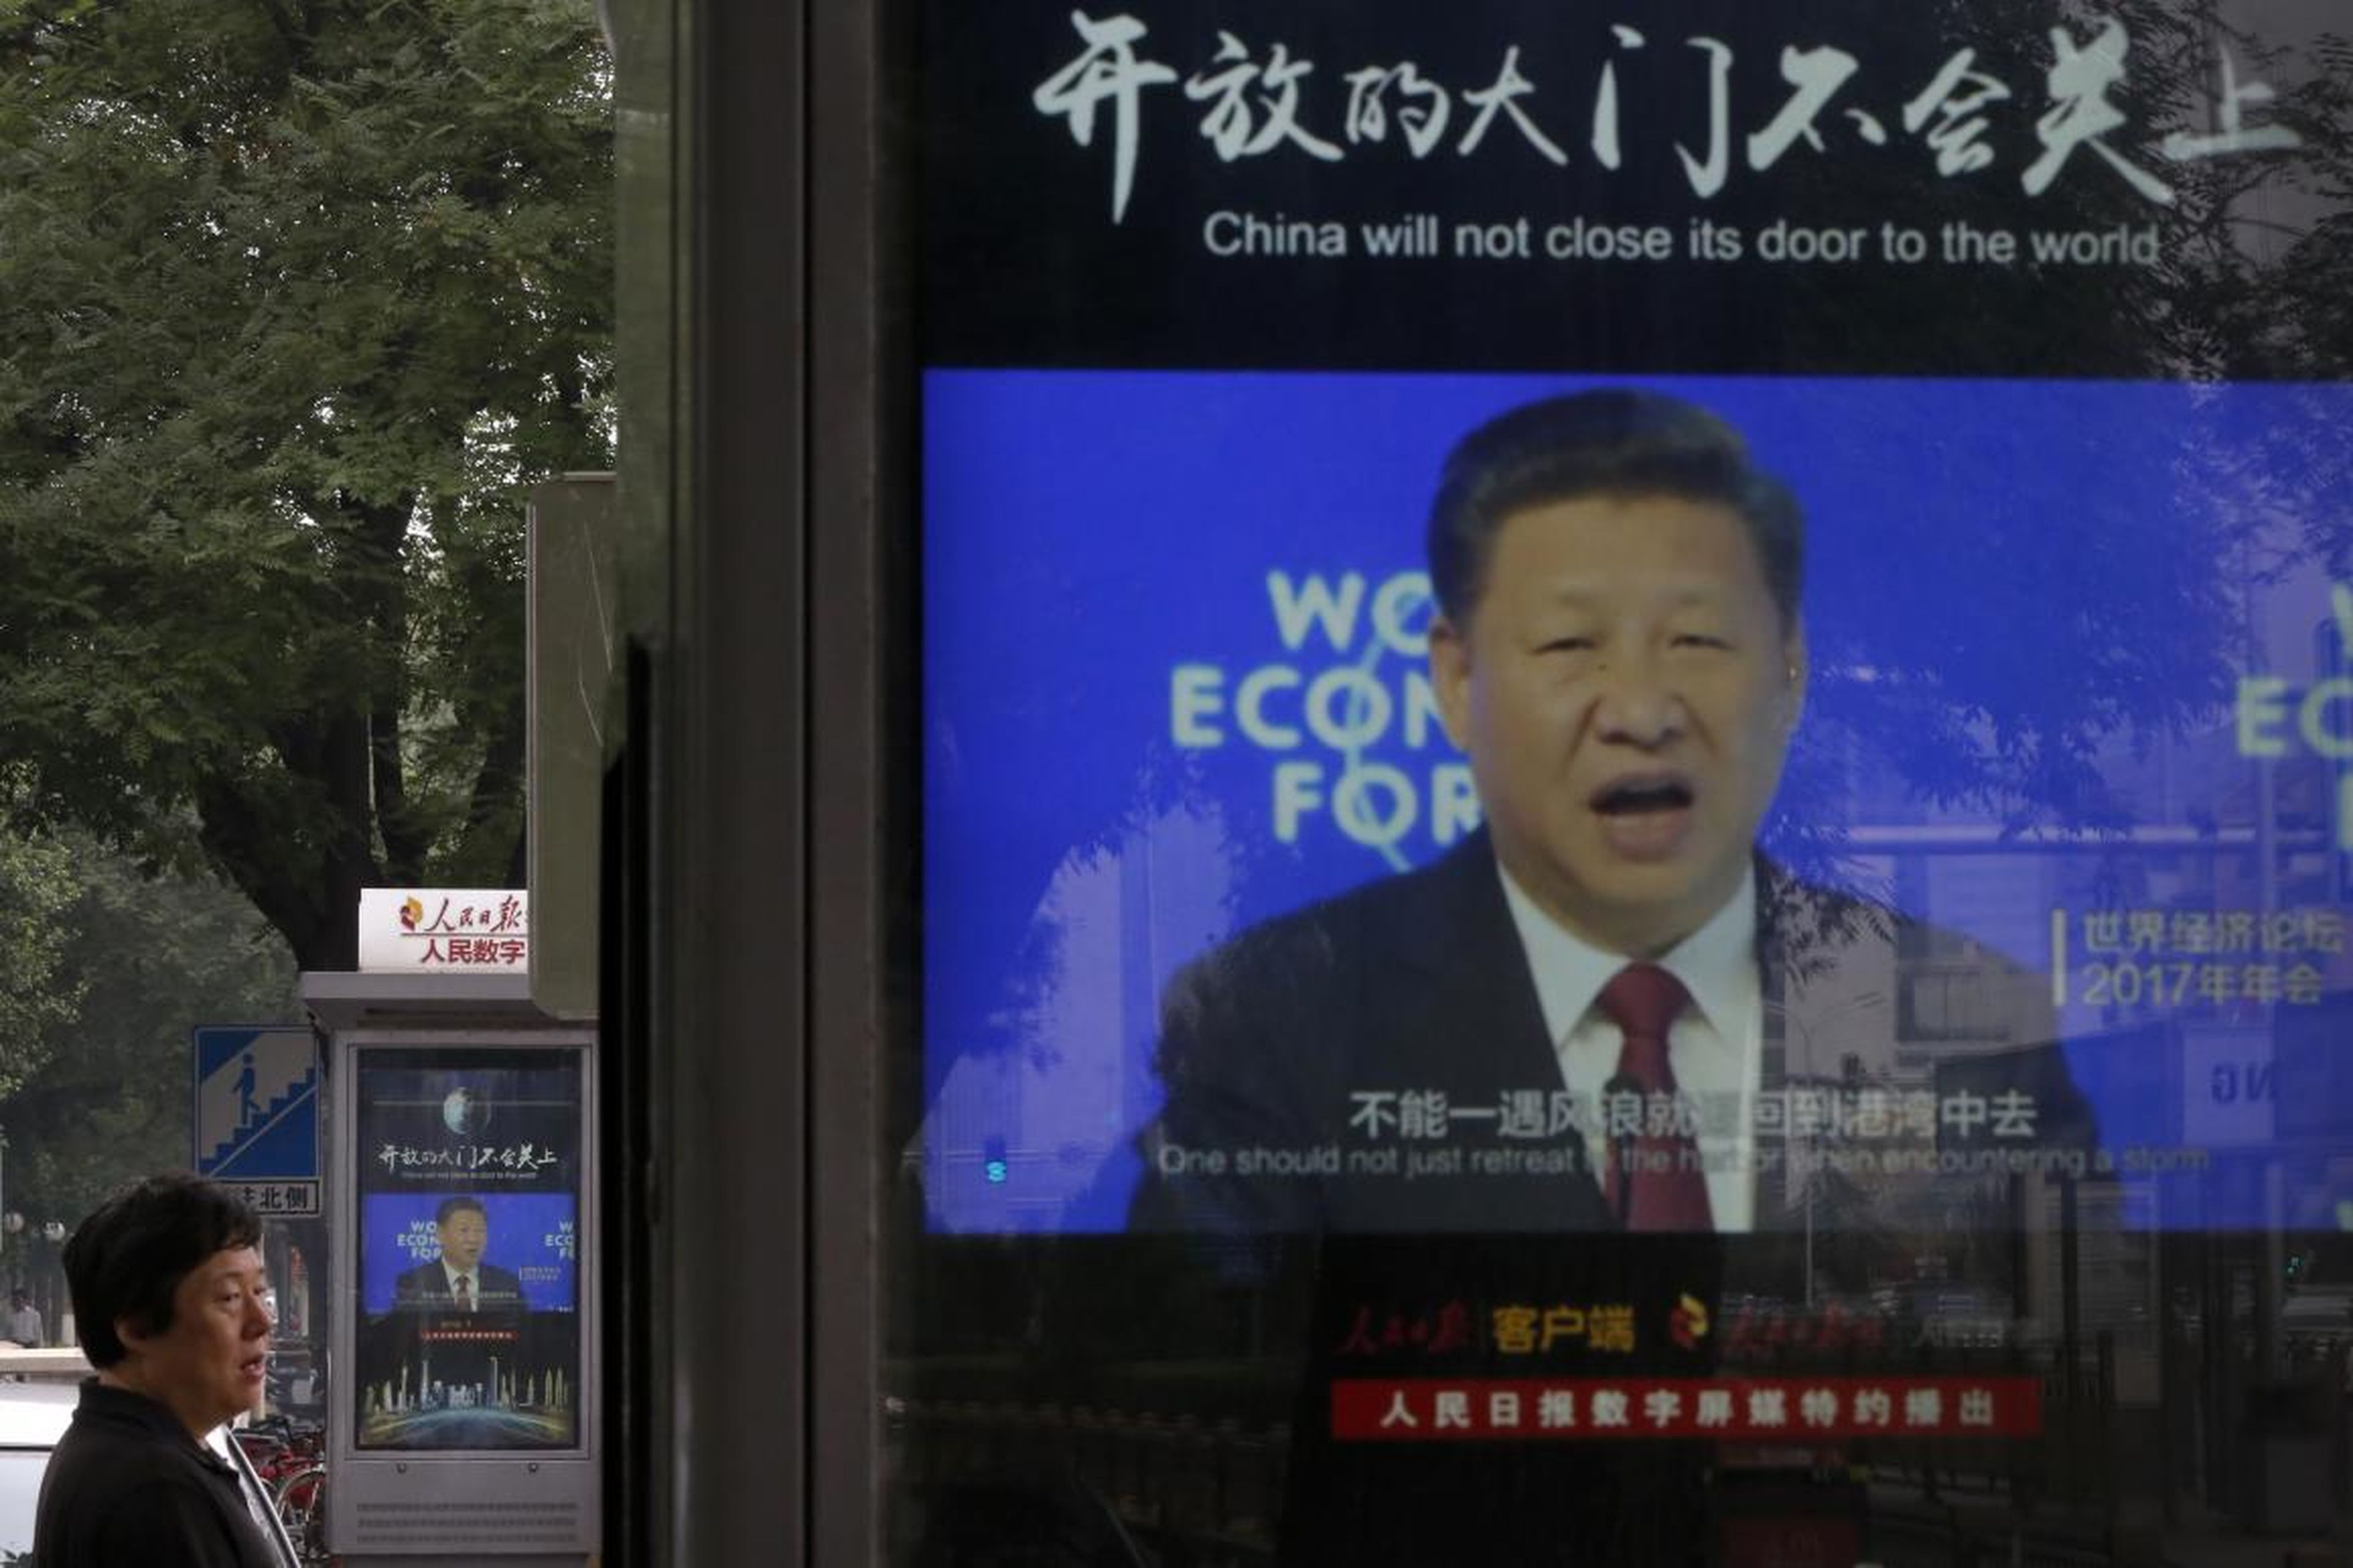 A man walks by electronic display panels advertising a video footage of Chinese President Xi Jinping speaking at the World Economy Forum on a street in Beijing, Monday, June 25, 2018.